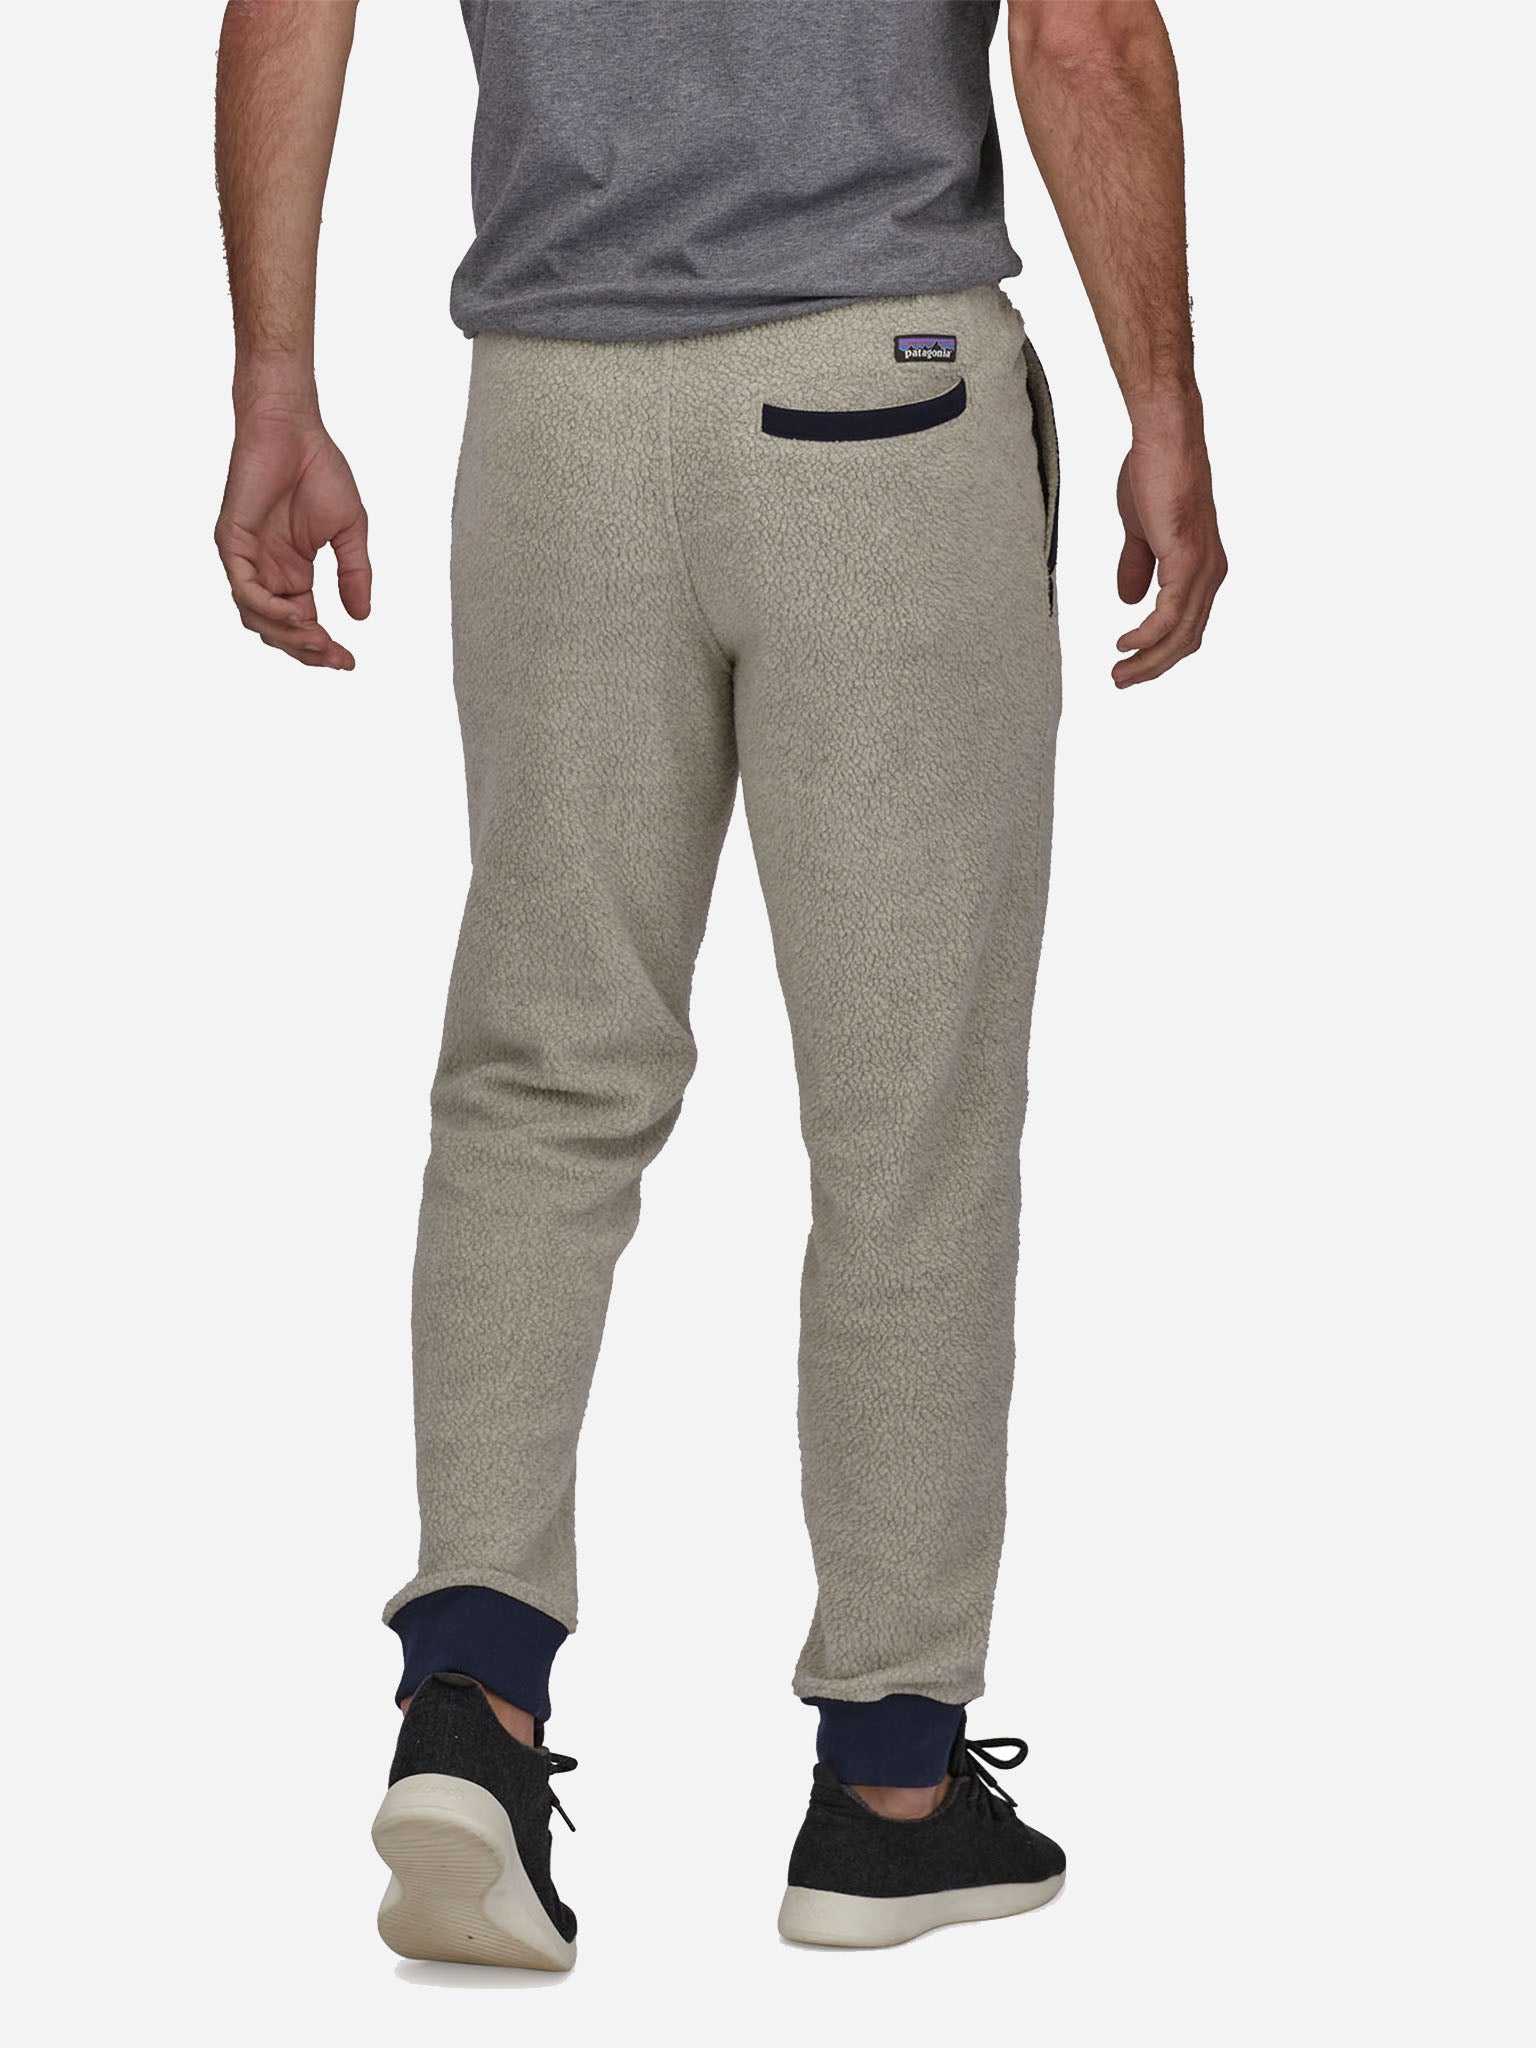 Patagonia Lightweight Synchilla® Snap-T™ Pants Men's